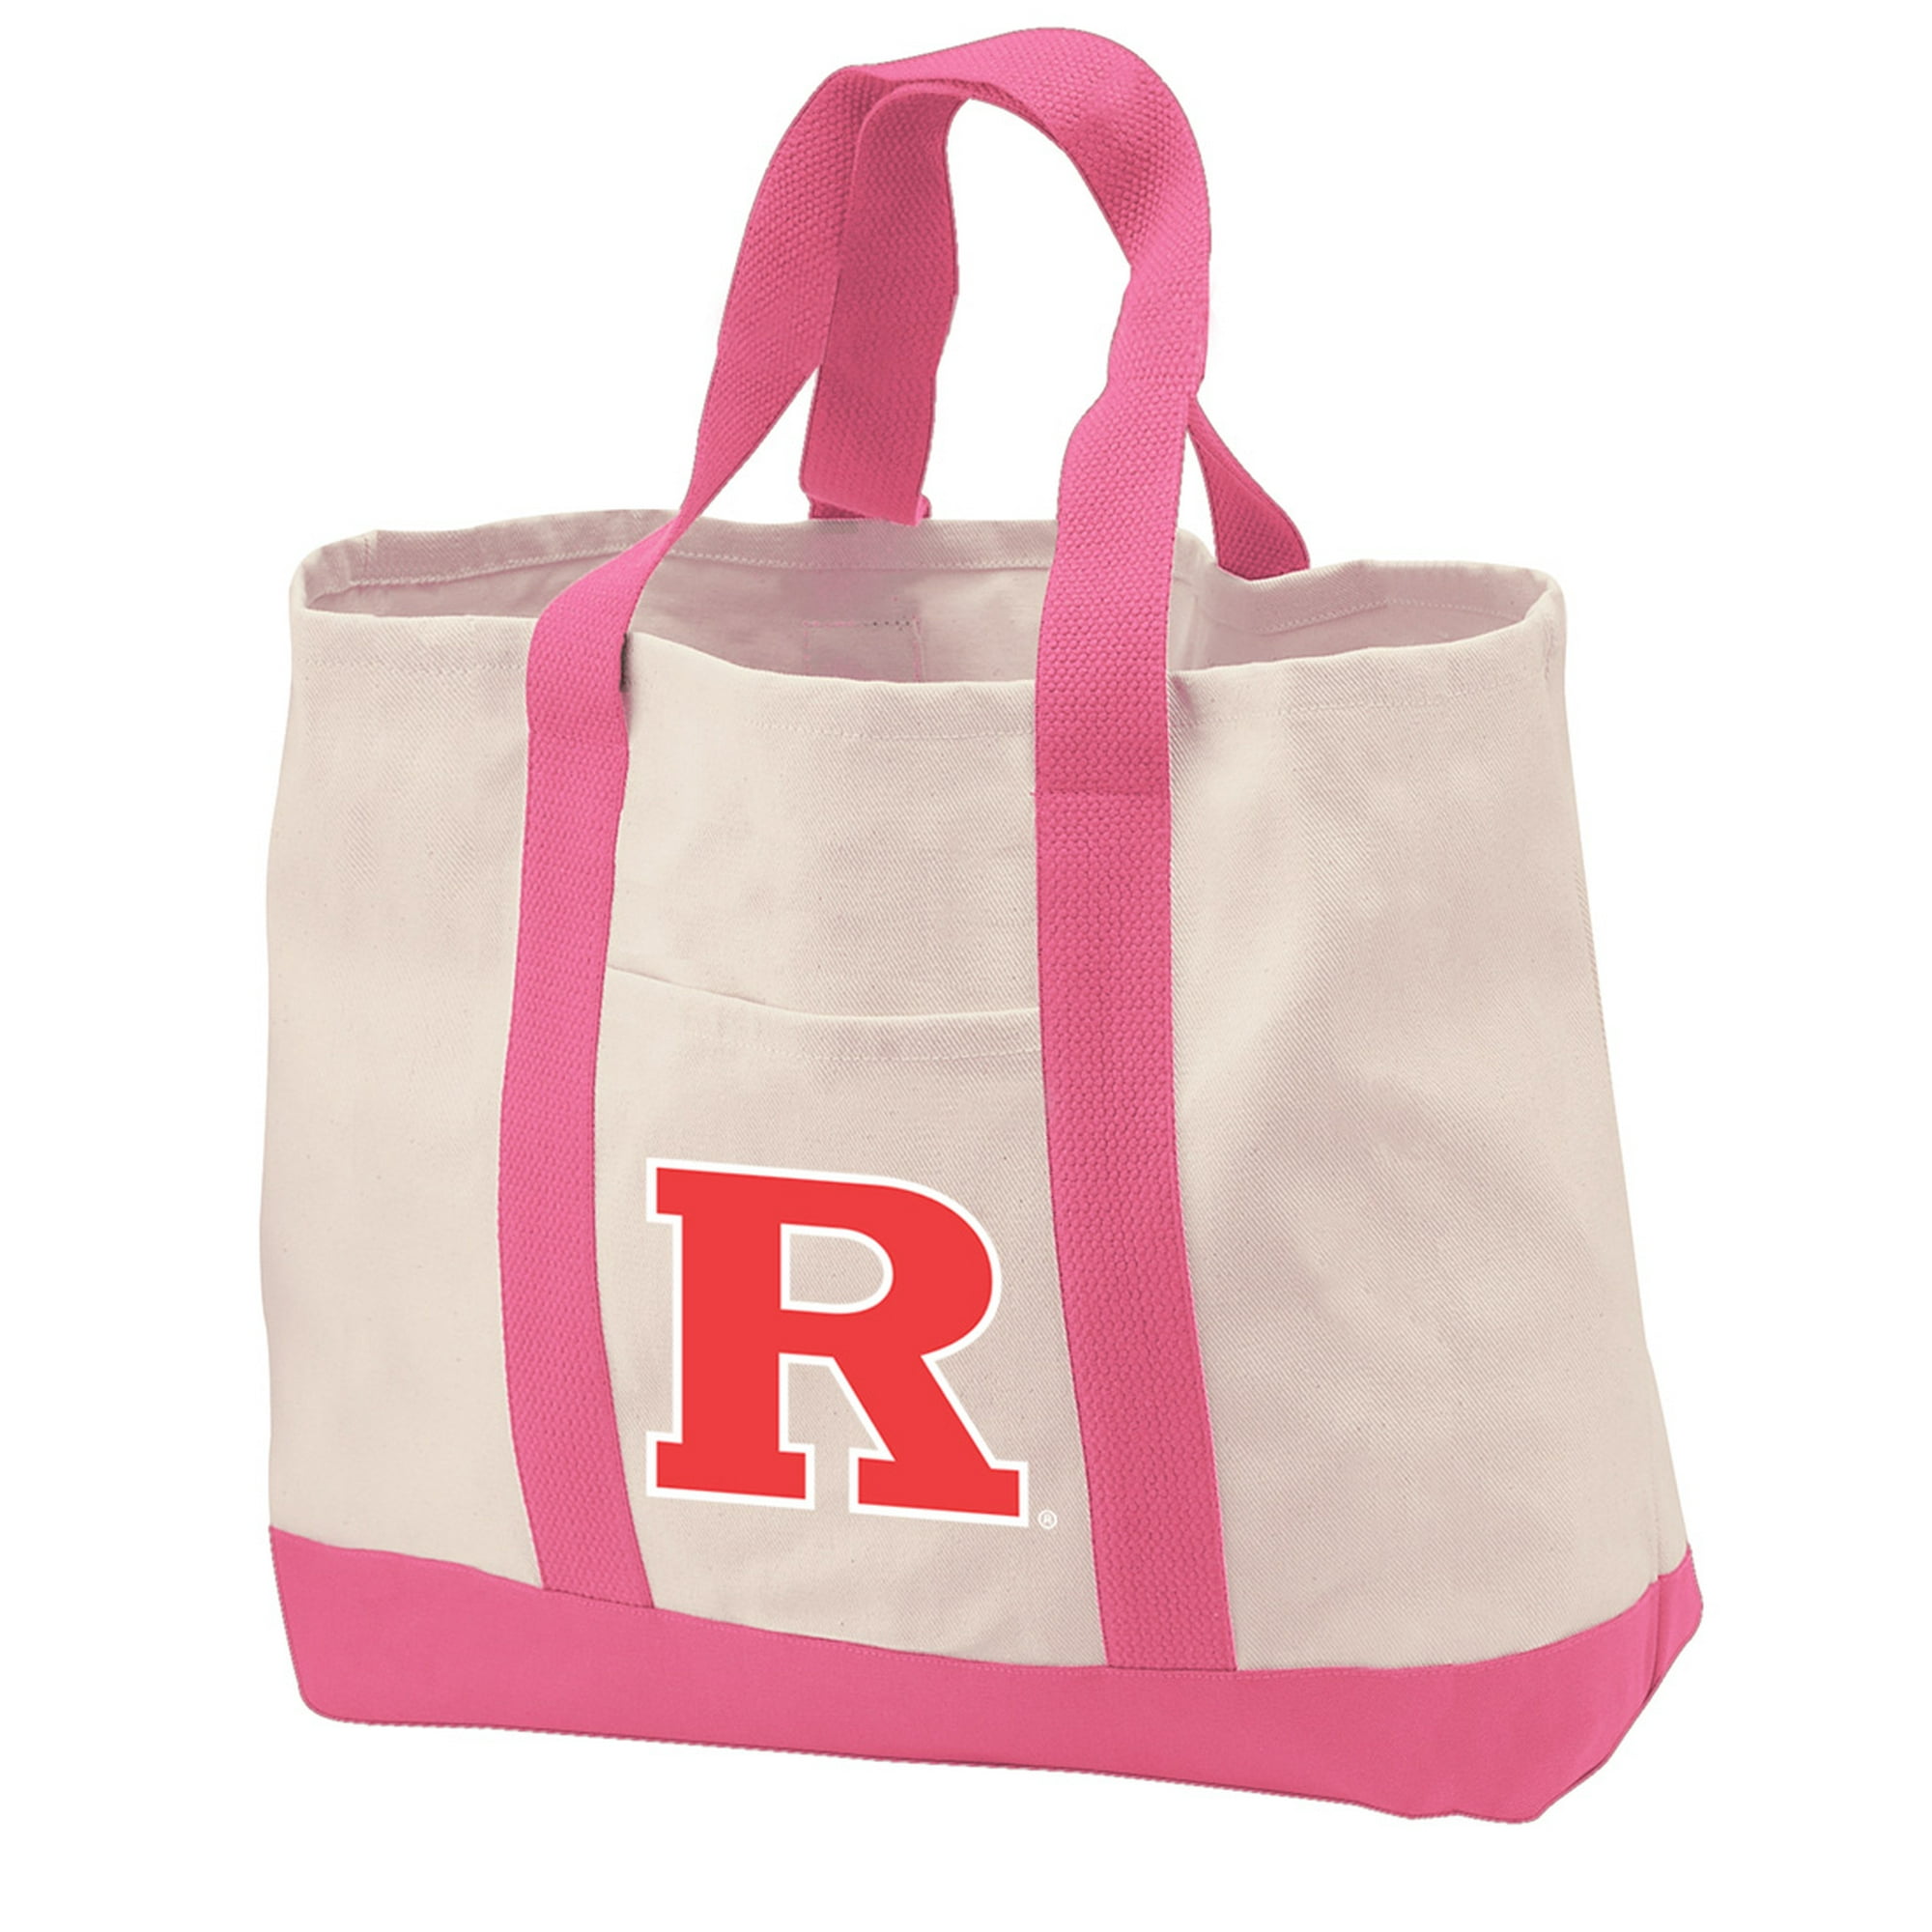 OFFICIAL RU Tote Bag CANVAS Rutgers University Tote Bags TRAVEL BEACH  SHOPPING 